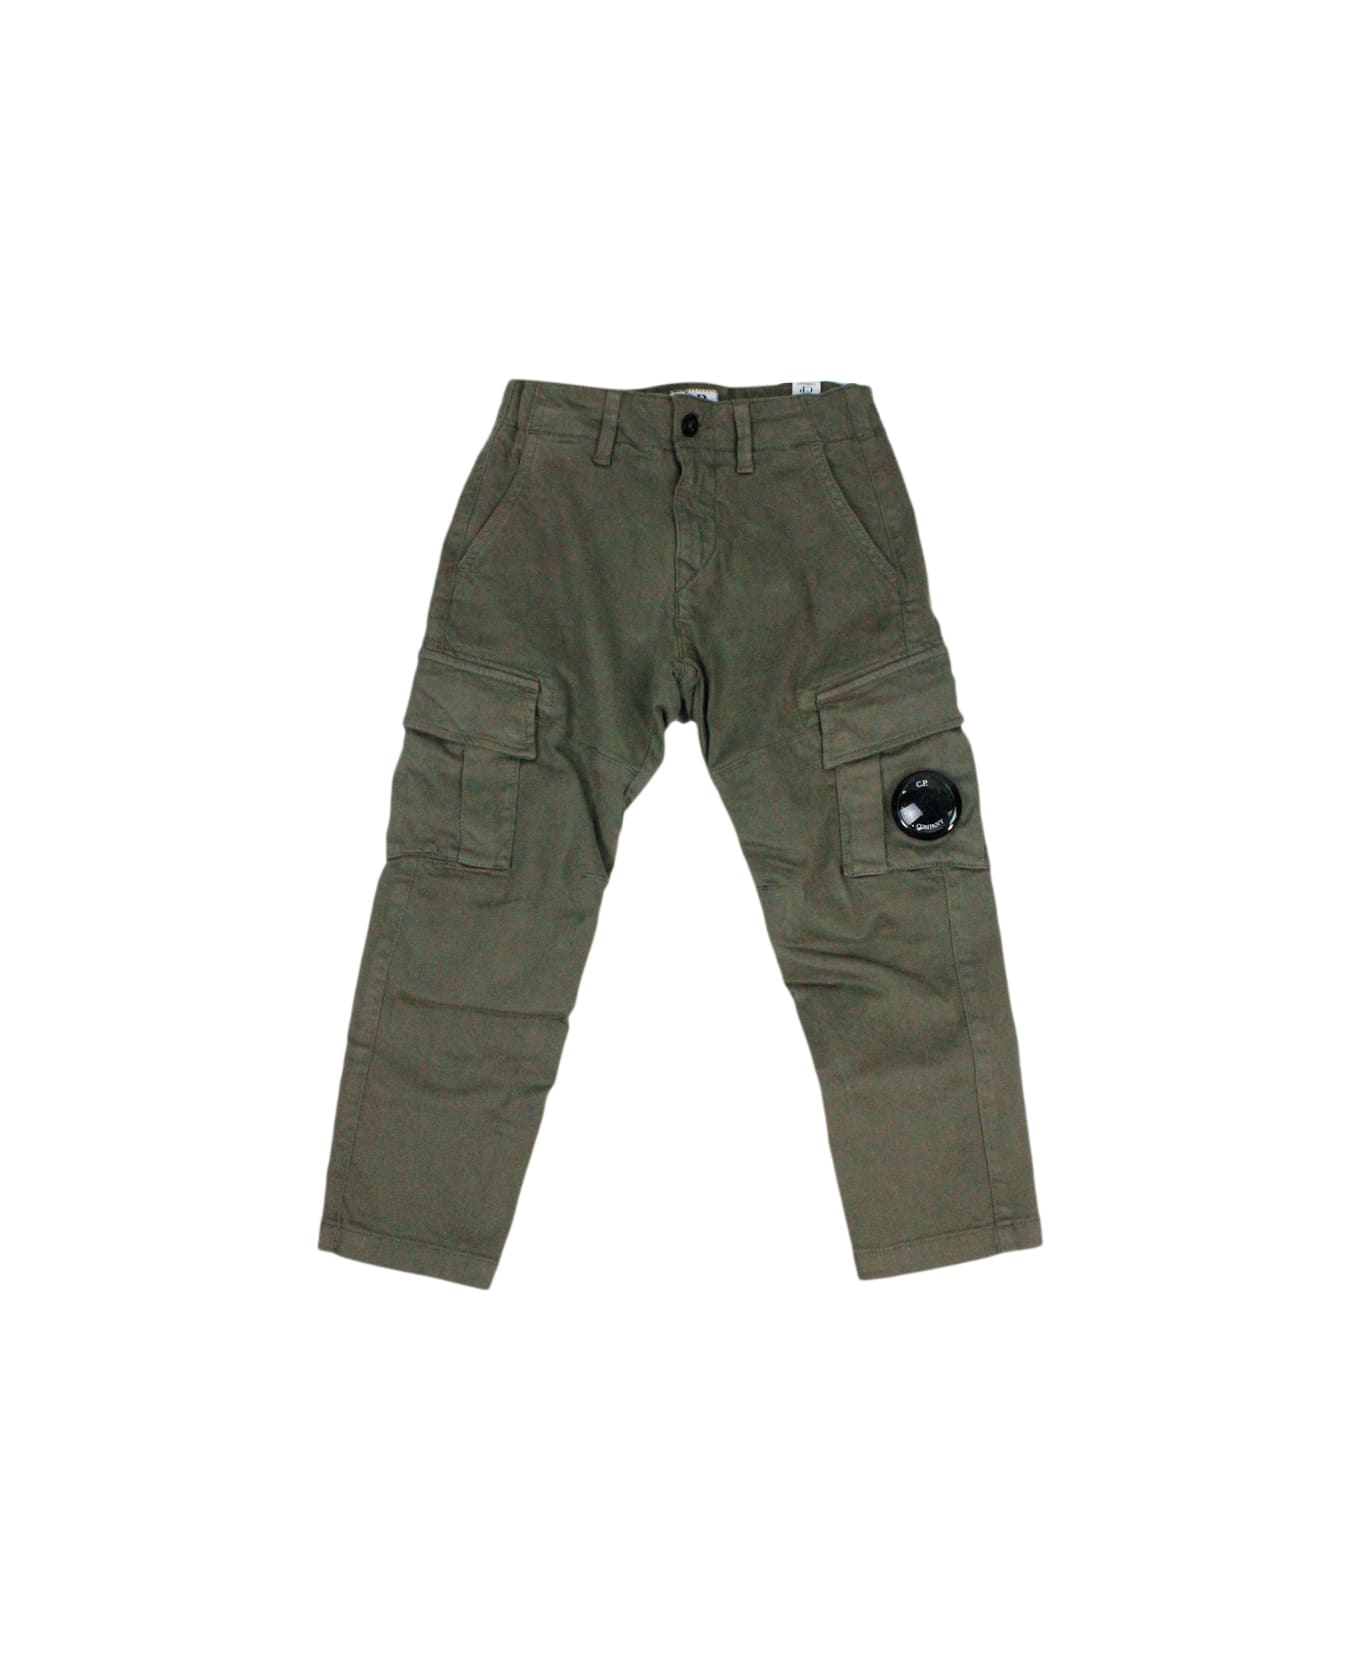 C.P. Company Cargo Pants With Pockets And Lens With Internal Drawstring And America Pockets With Zip And Button Closure - Military ボトムス